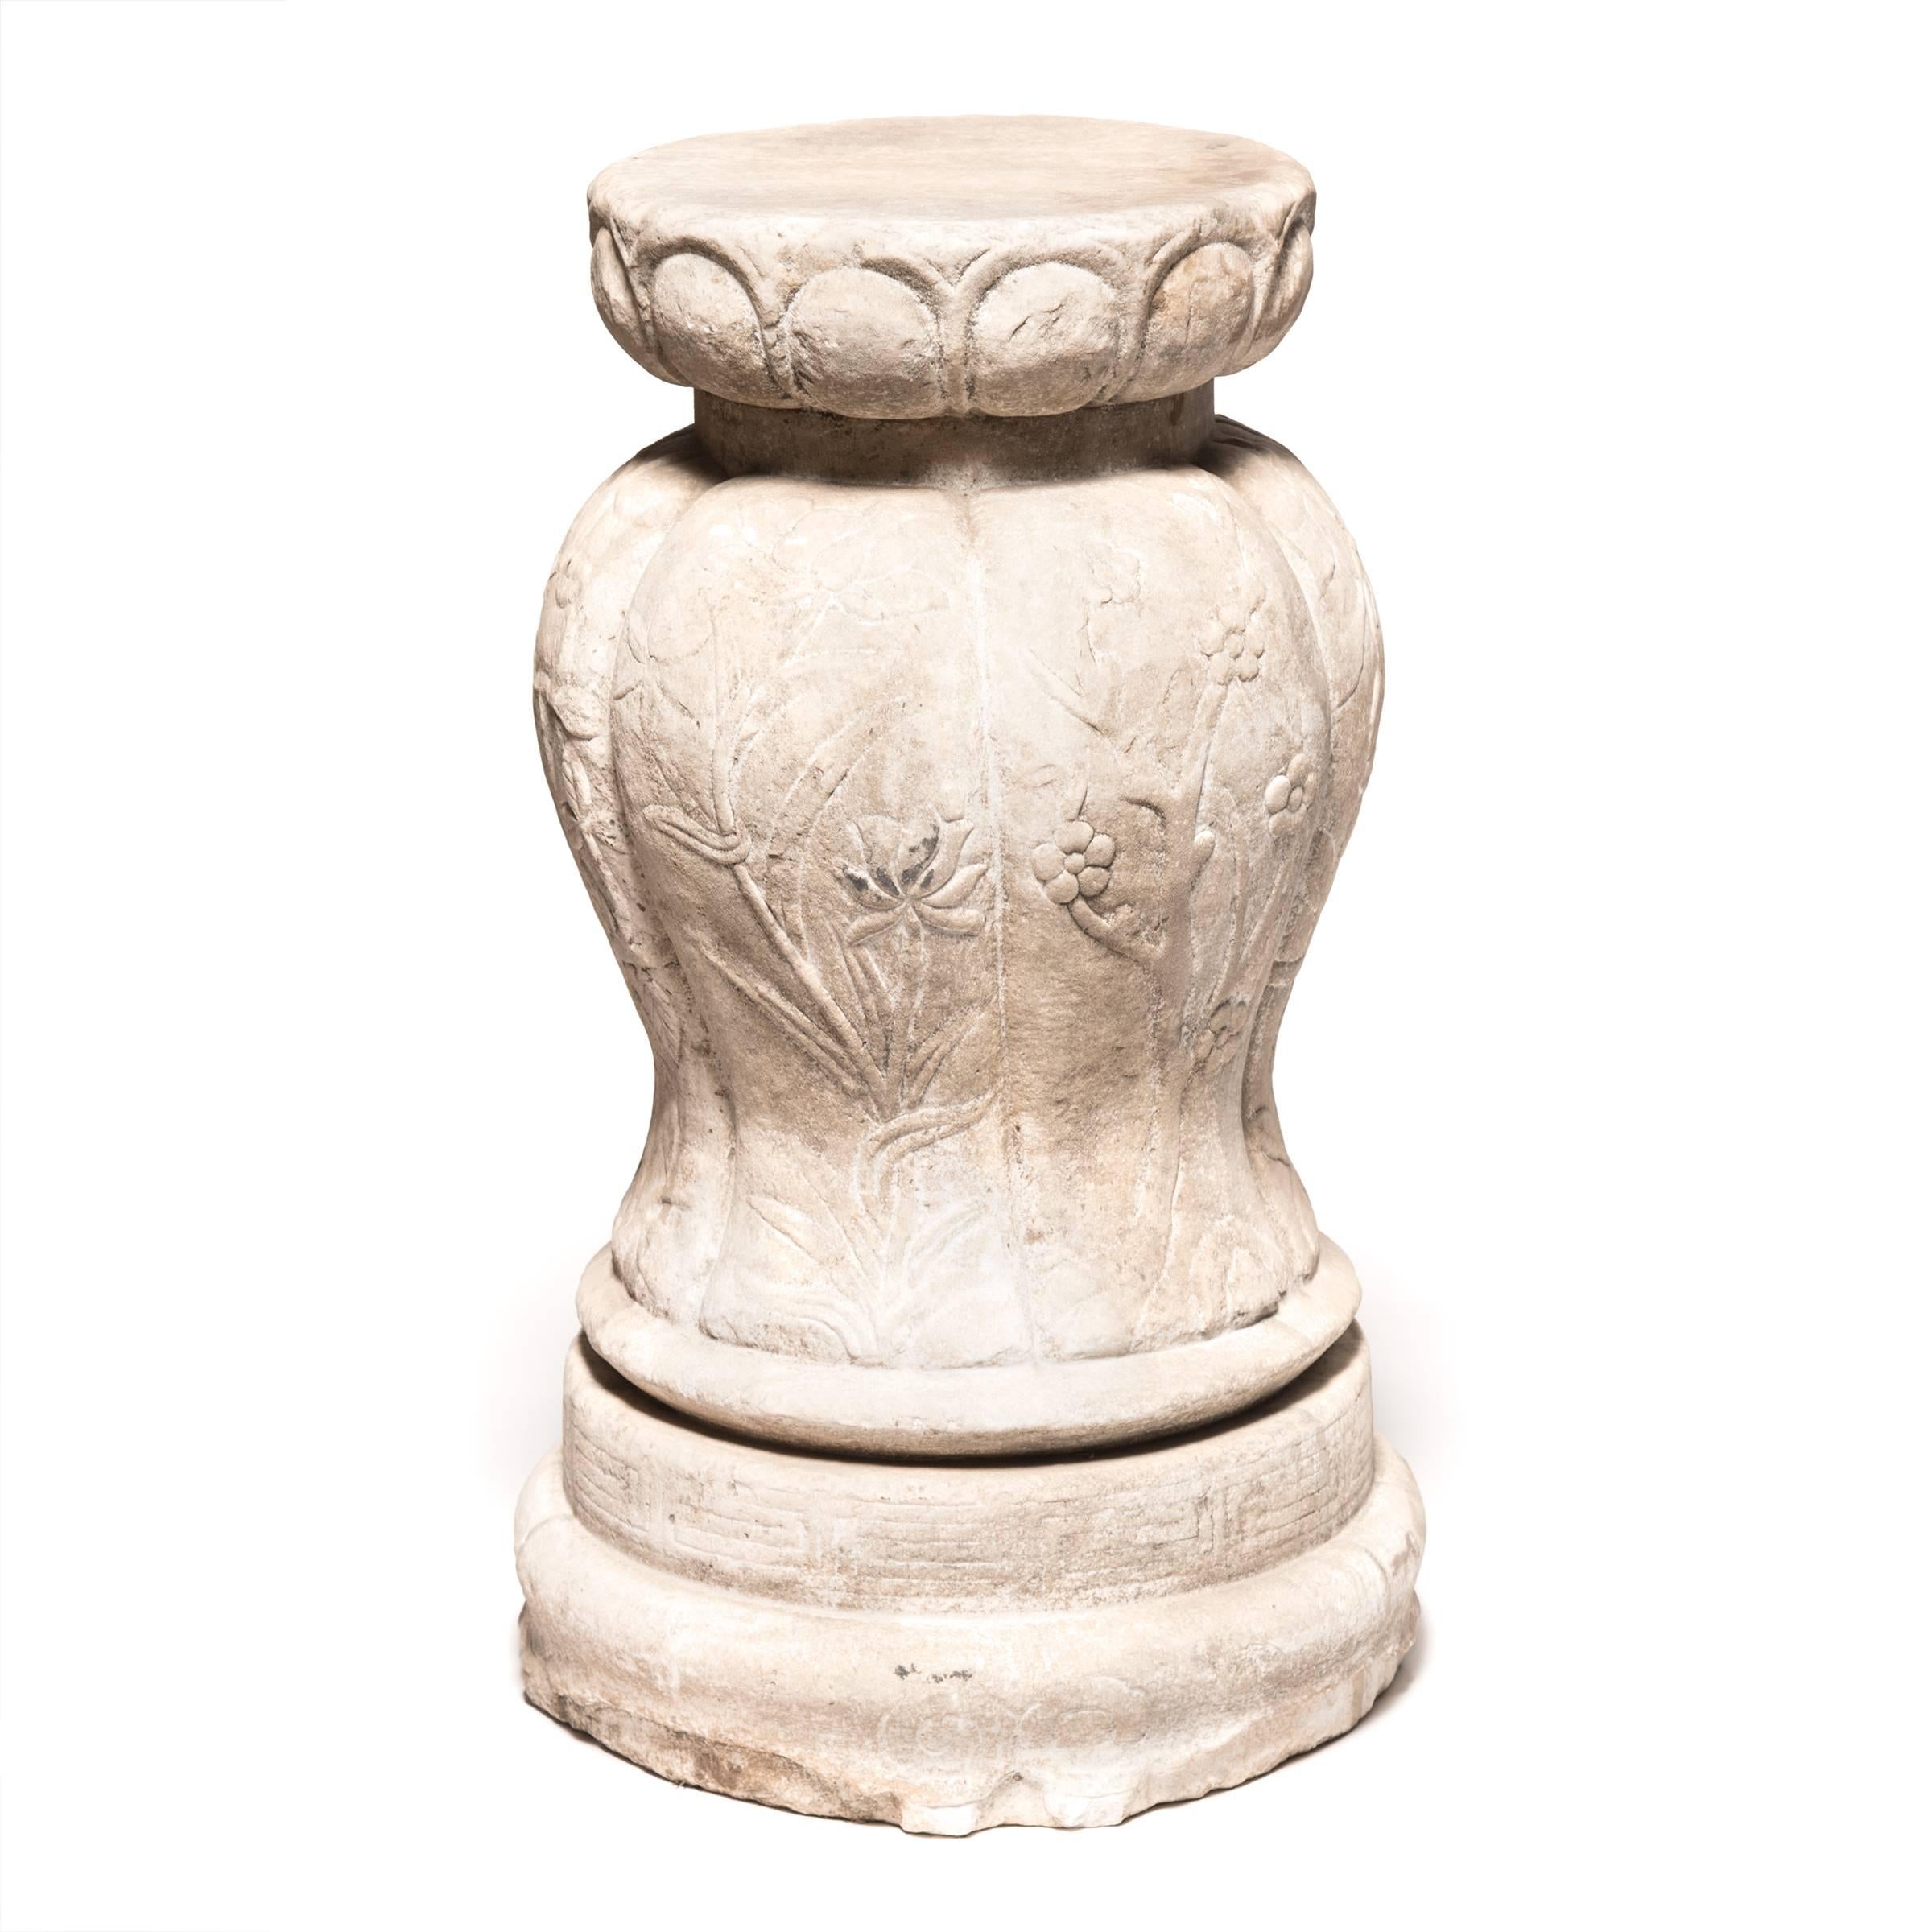 This finely carved marble pedestal is ideal for display inside or out. The raised pleats stand in for a melon’s ribs and flow down from the pedestal top to the stepped disc base. The dynamic relationship from rounded top to swelling center to